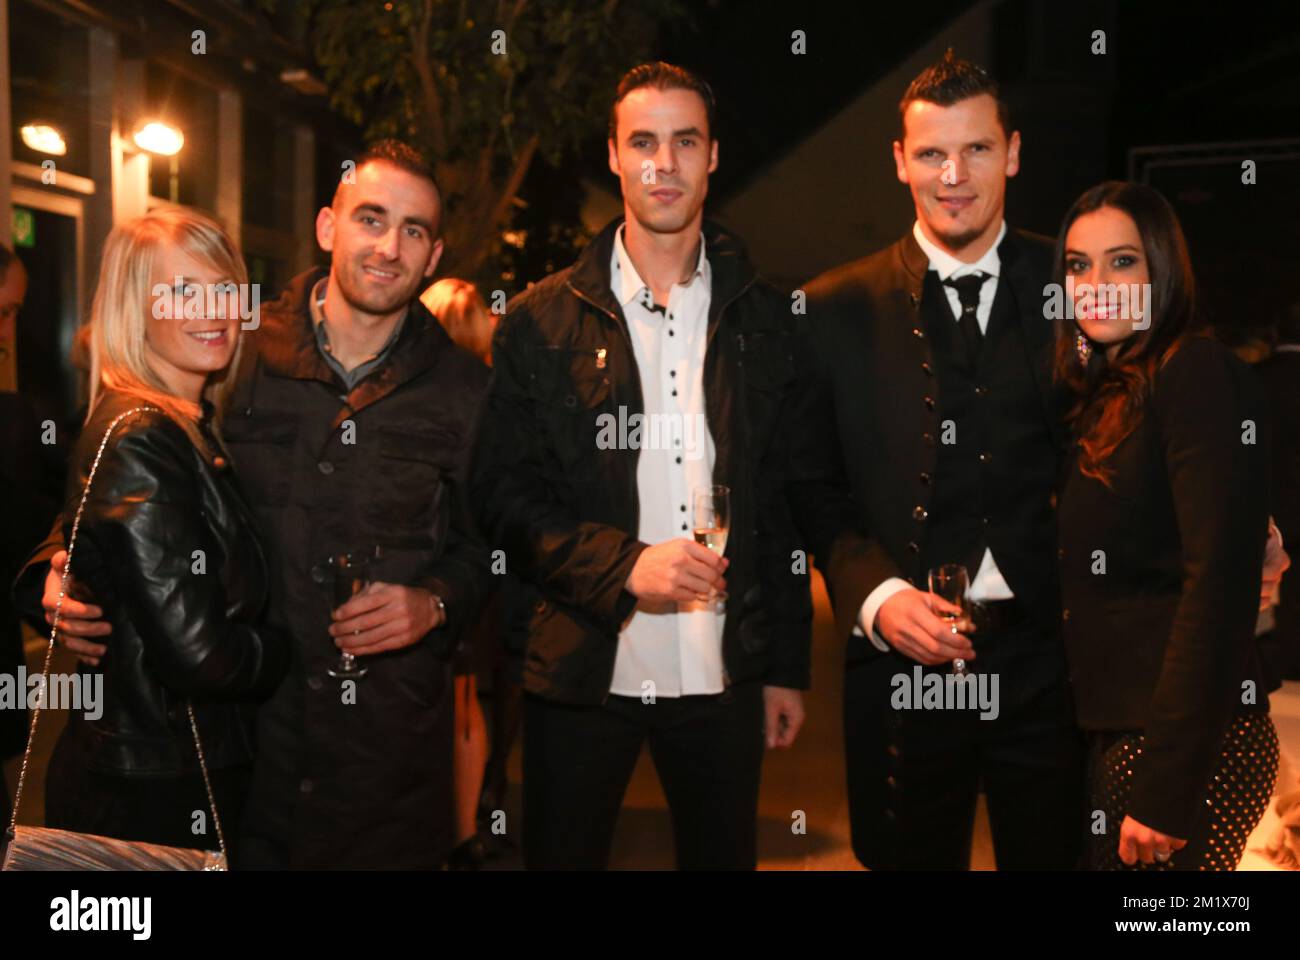 Former Red Devil Daniel Van Buyten and his wife Celine and his brother Alain pictured before the Gala evening 'Sport and Fashion evening', a charity gala for two associations, the Constant Van Den Stock foundation and Justine 4 Kids, in the Spiroudome, in Charleroi, Wednesday 19 November 2014. Stock Photo